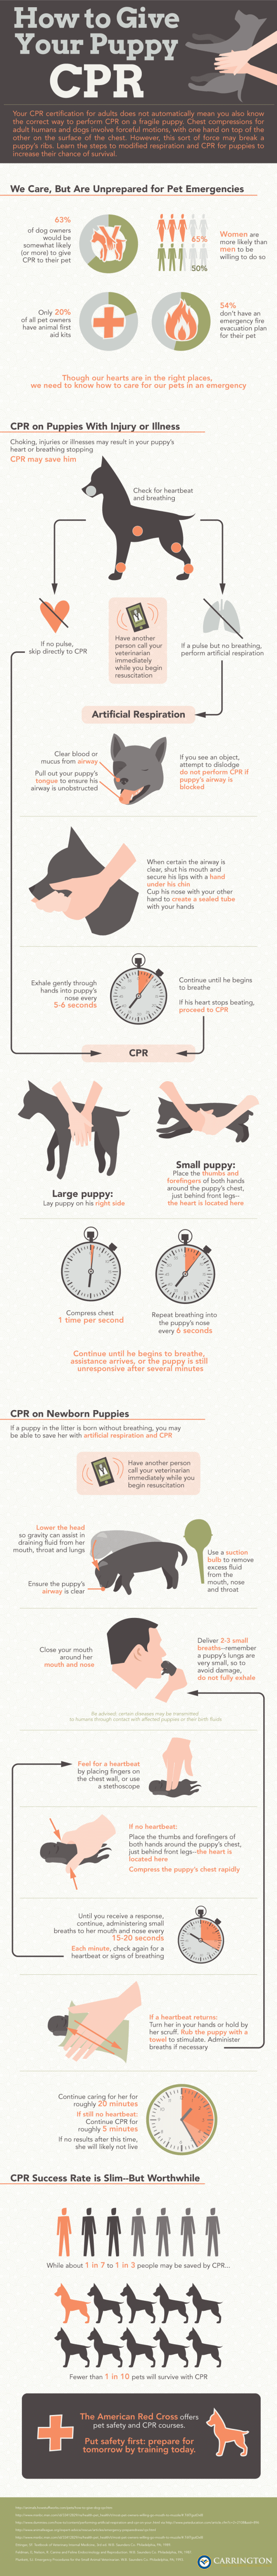 how-to-give-your-puppy-cpr